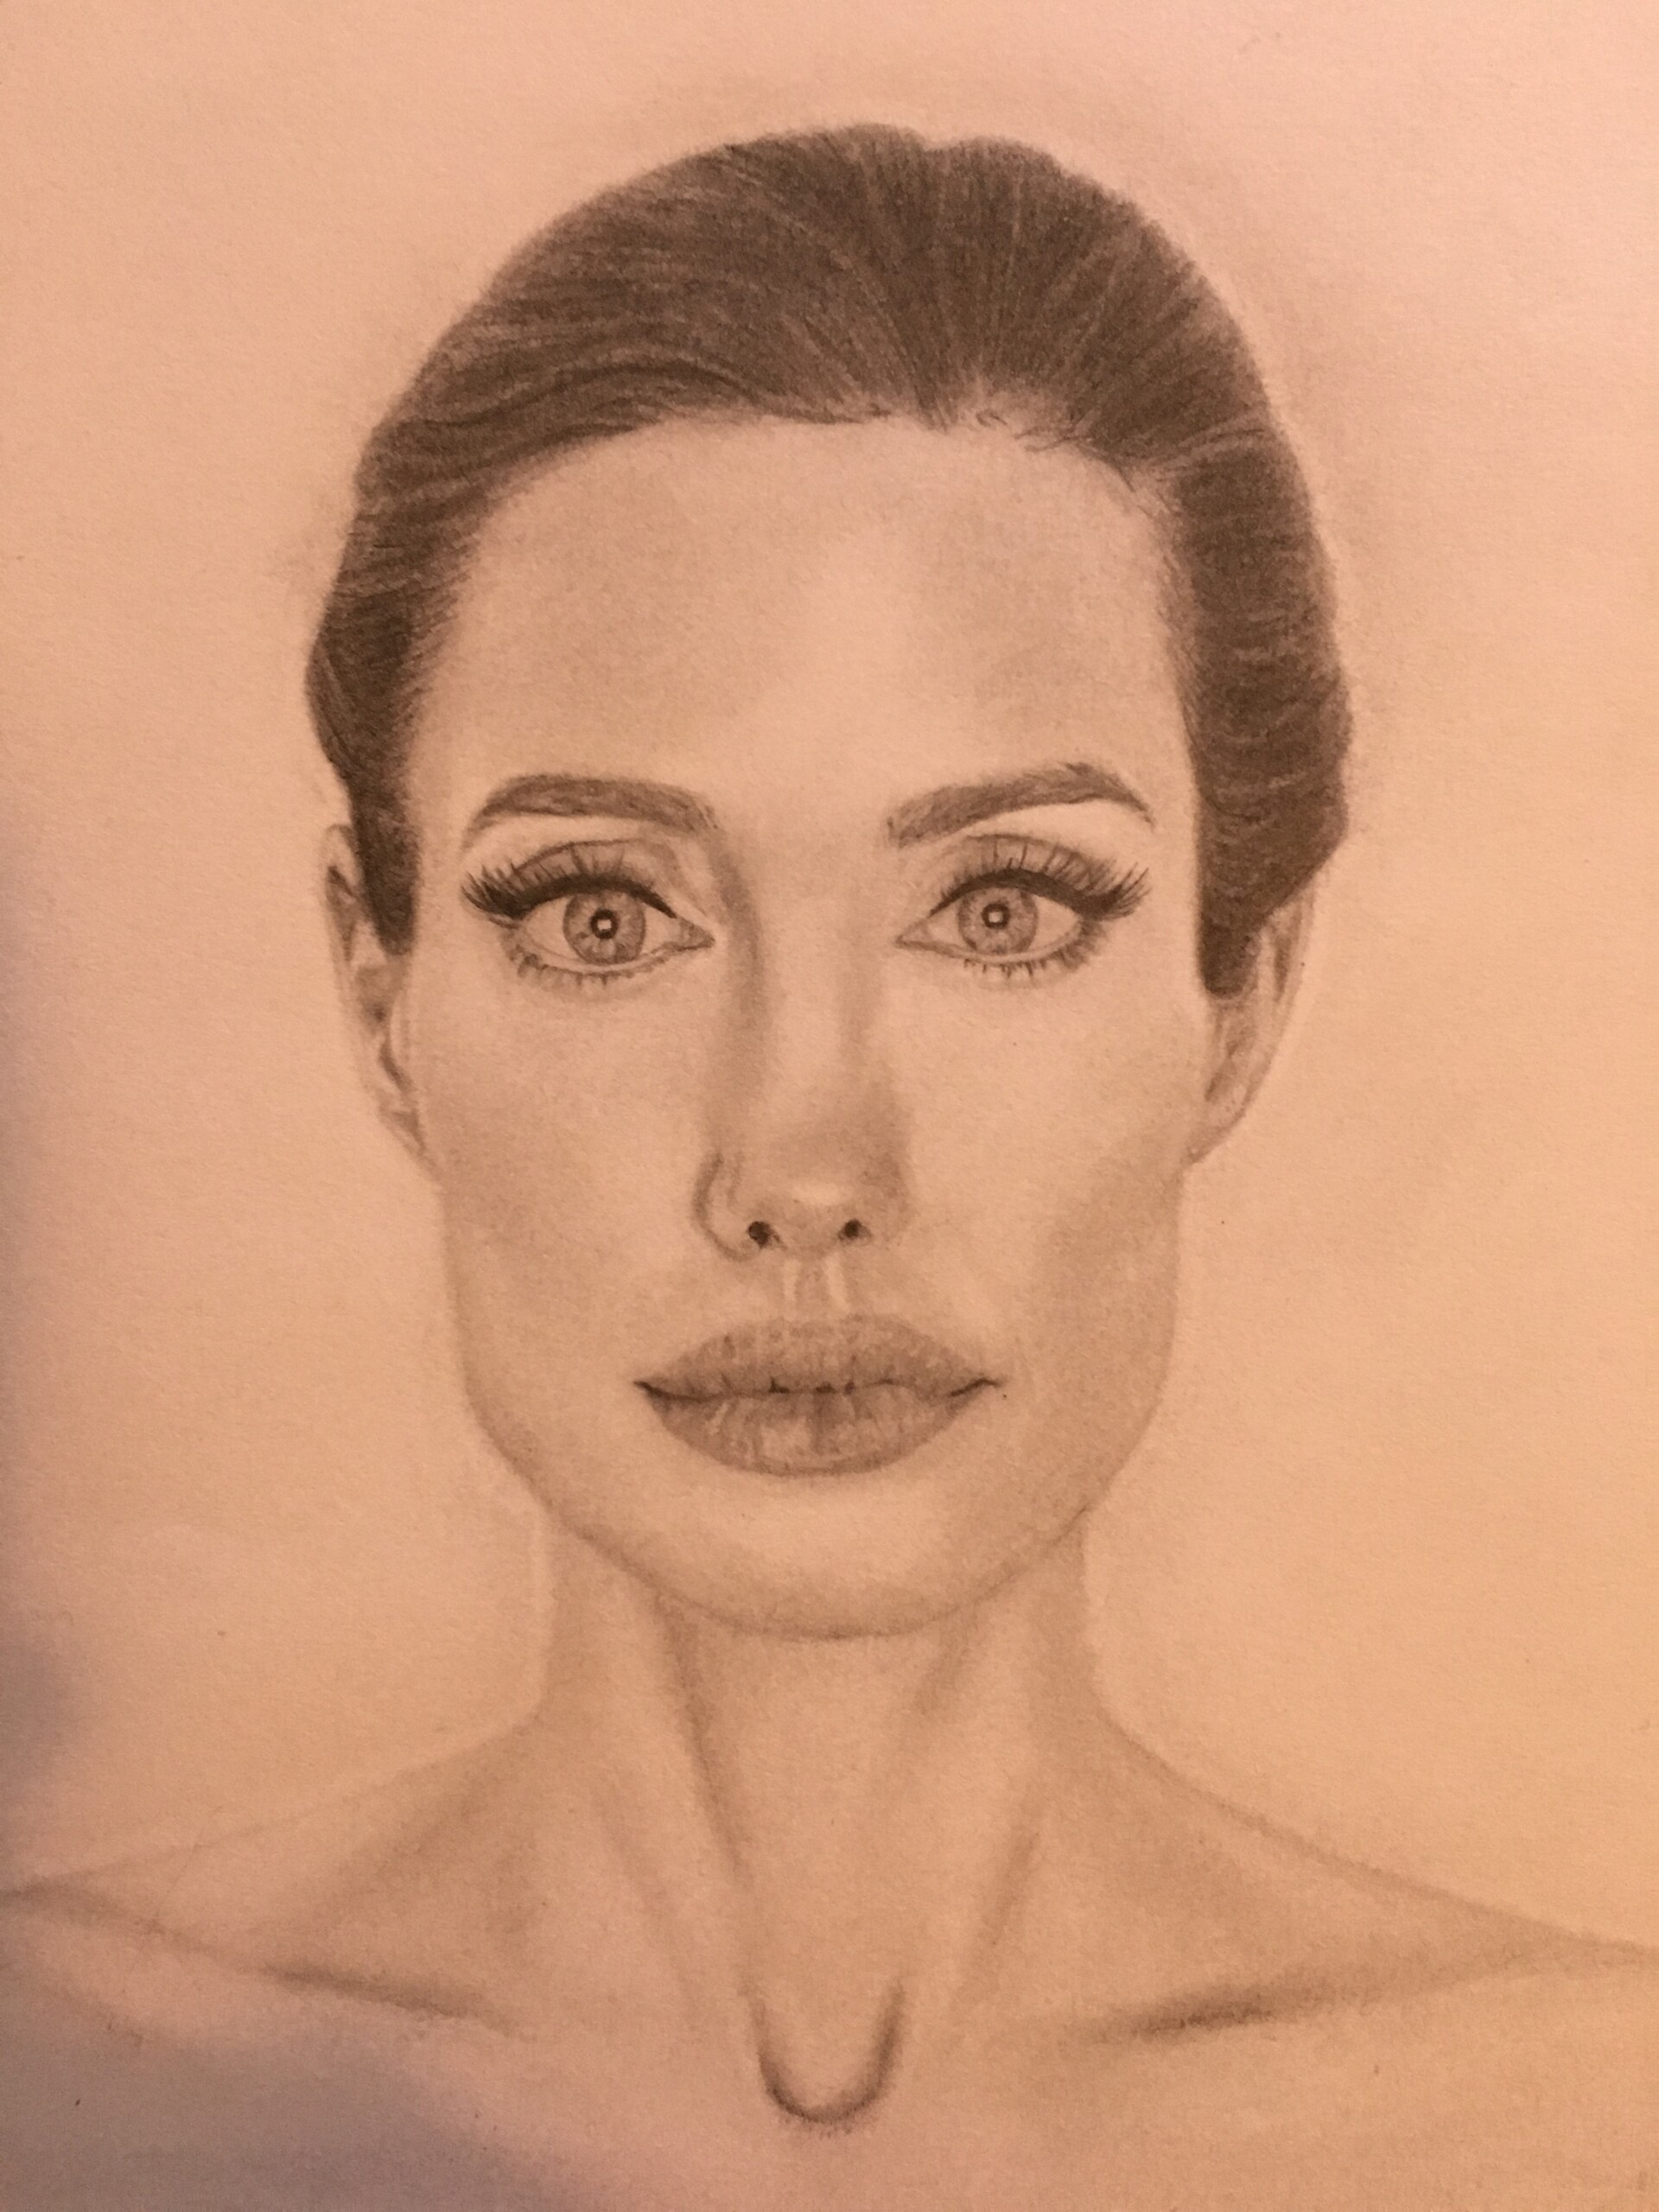 Buy Drawing Print of Angelina Jolie Online in India  Etsy